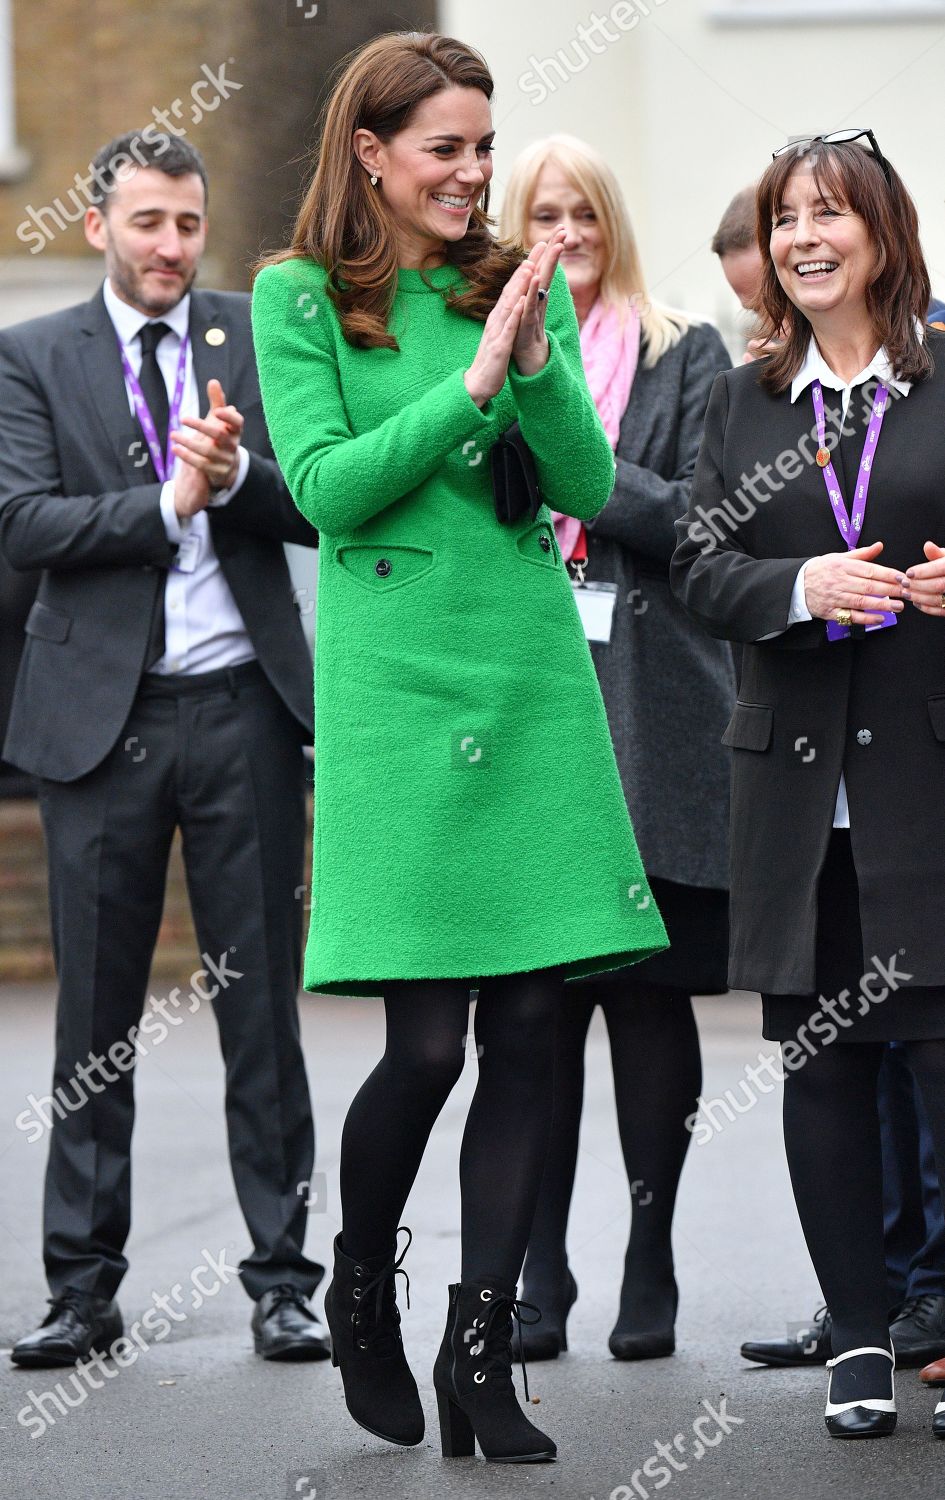 catherine-duchess-of-cambridge-visits-schools-in-support-of-childrens-mental-health-london-uk-shutterstock-editorial-10085098y.jpg